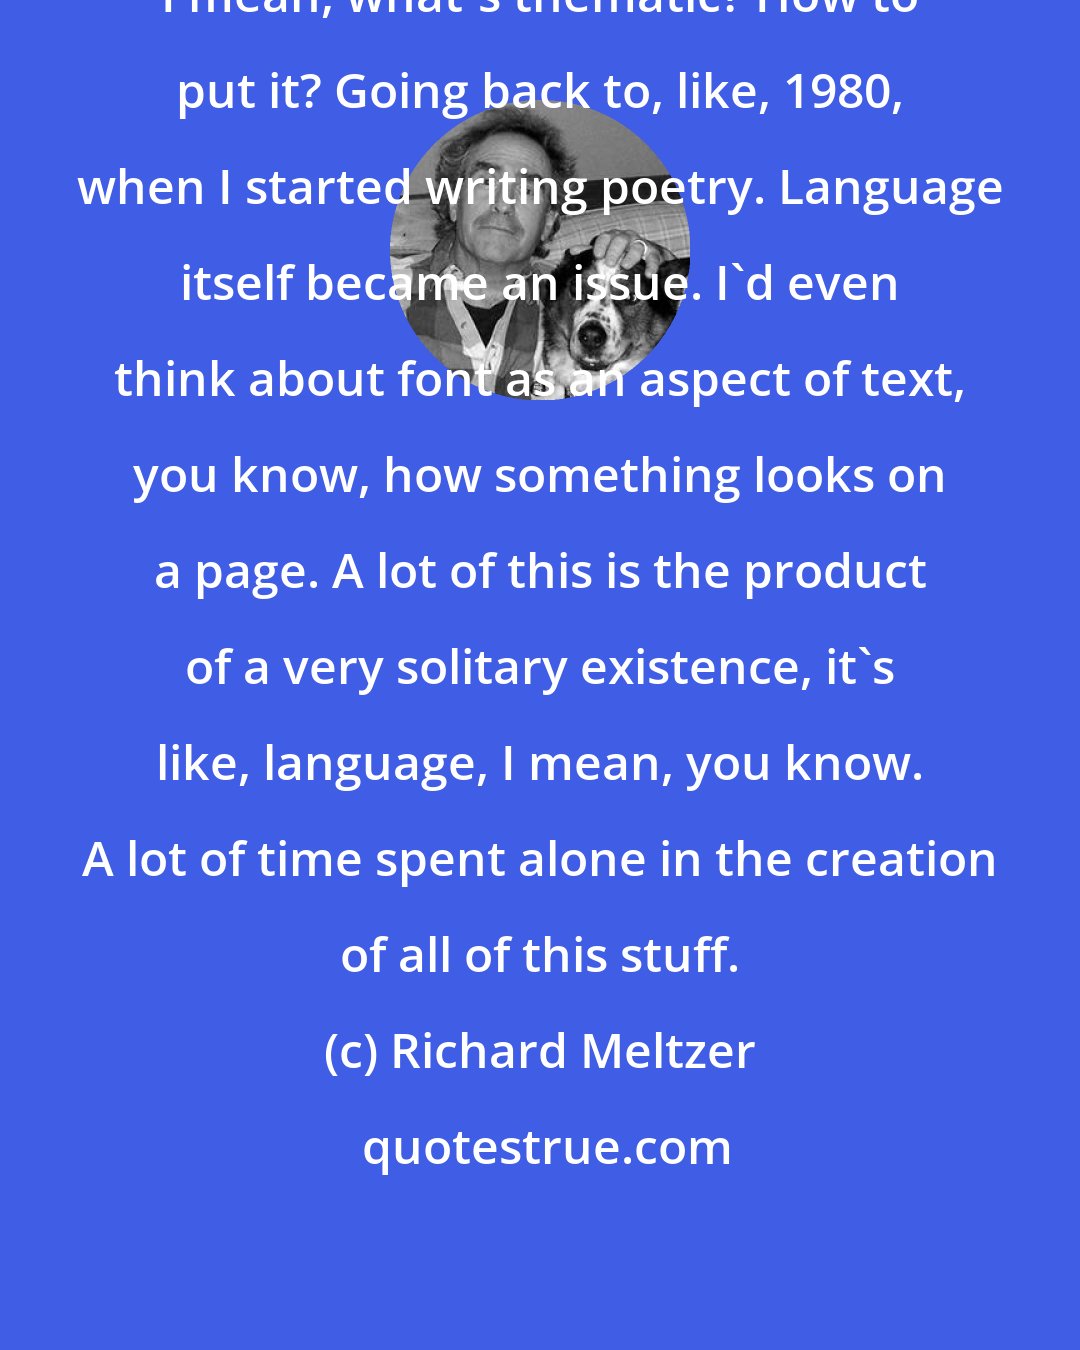 Richard Meltzer: I mean, what's thematic? How to put it? Going back to, like, 1980, when I started writing poetry. Language itself became an issue. I'd even think about font as an aspect of text, you know, how something looks on a page. A lot of this is the product of a very solitary existence, it's like, language, I mean, you know. A lot of time spent alone in the creation of all of this stuff.